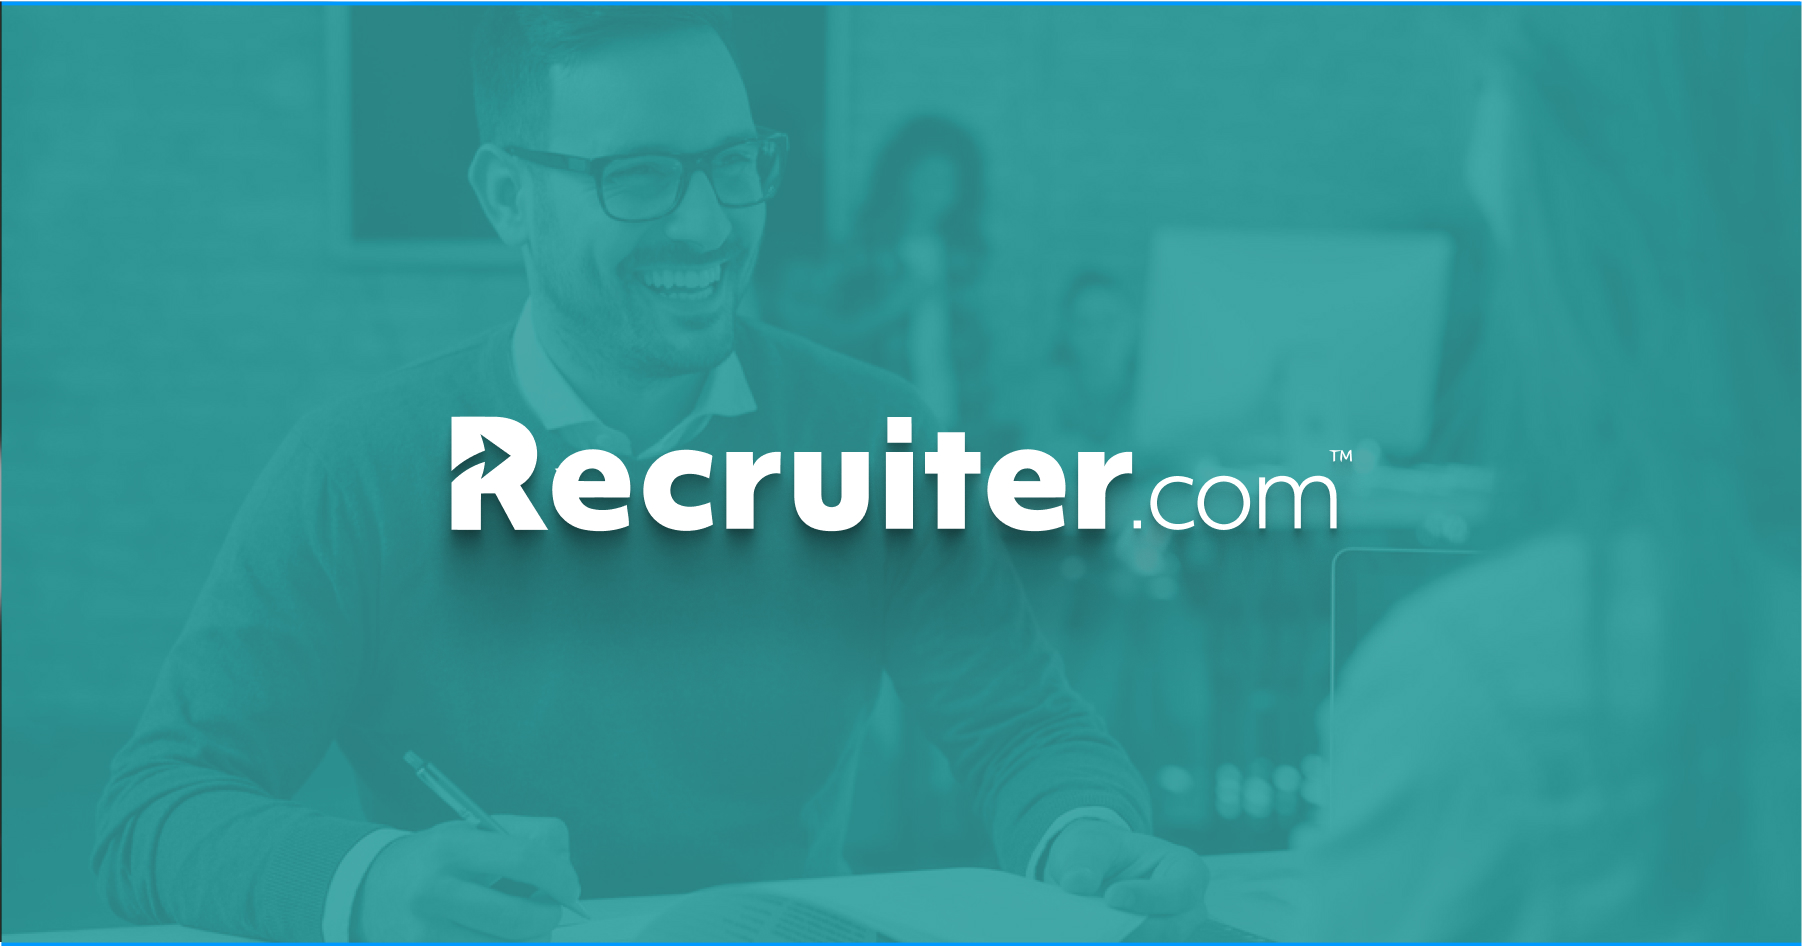 Recruiting industry news roundup from recruiter.com: April 2021